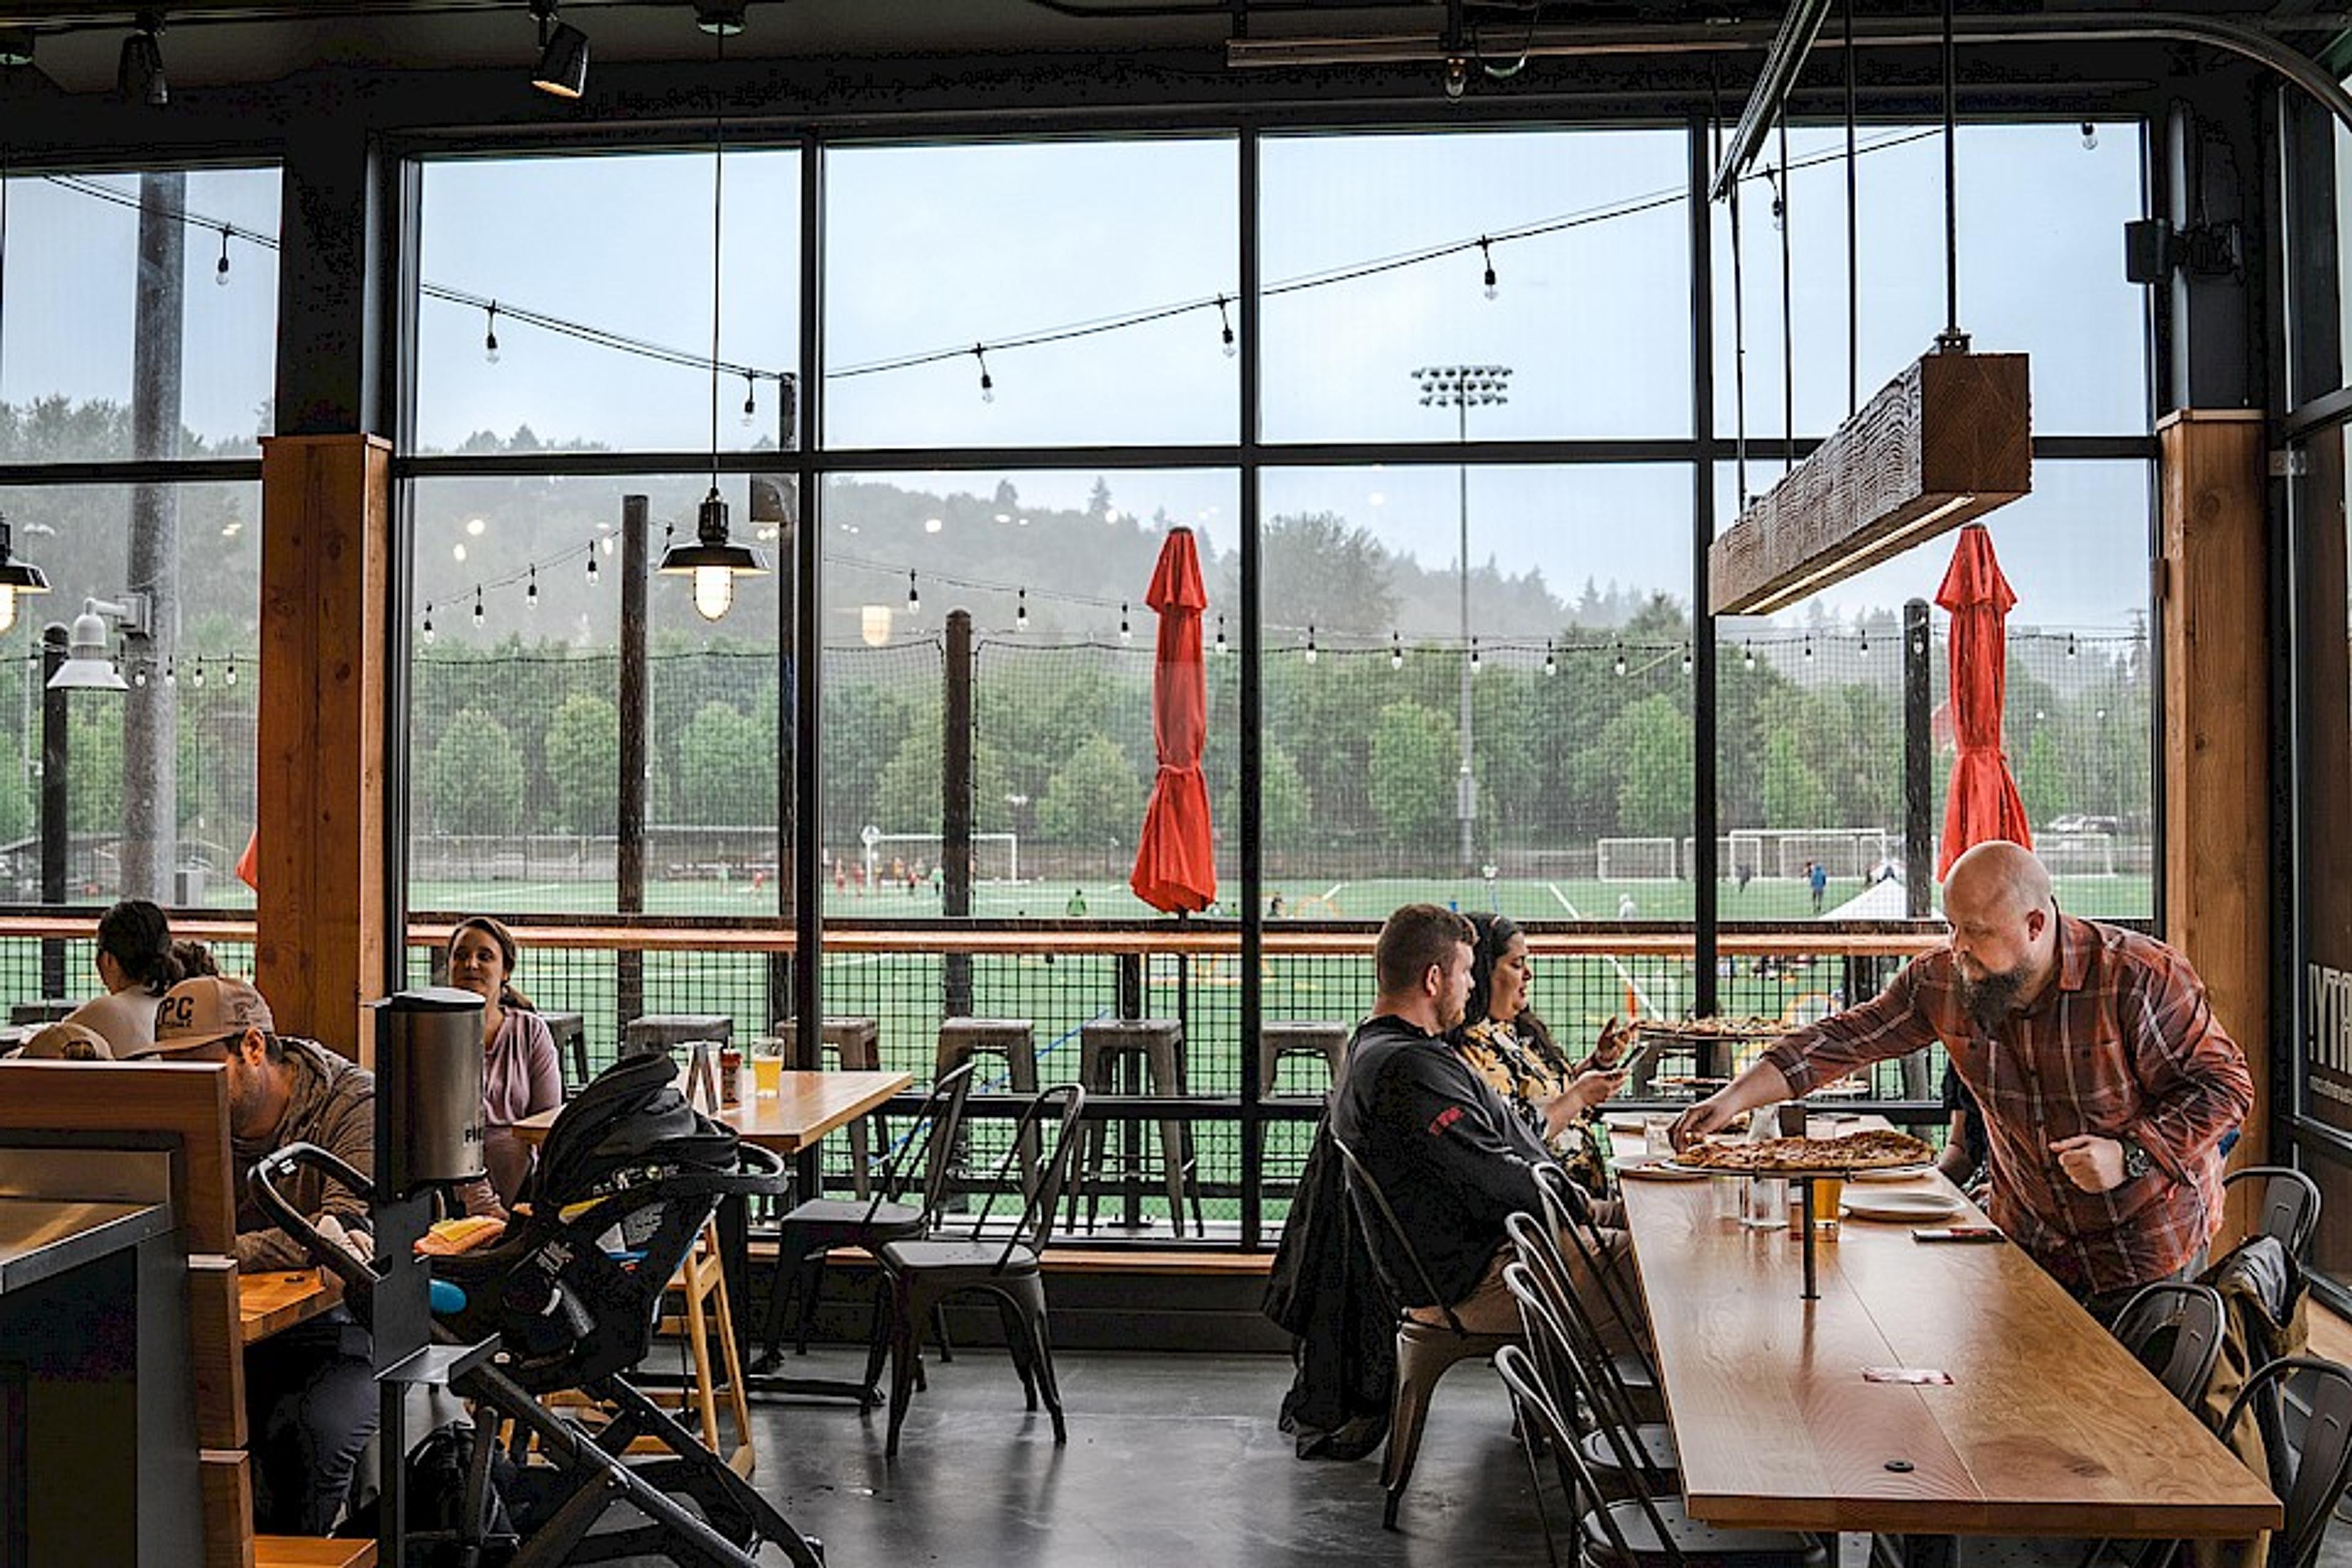 dining room with people sharing pizzas, overlooking sports fields